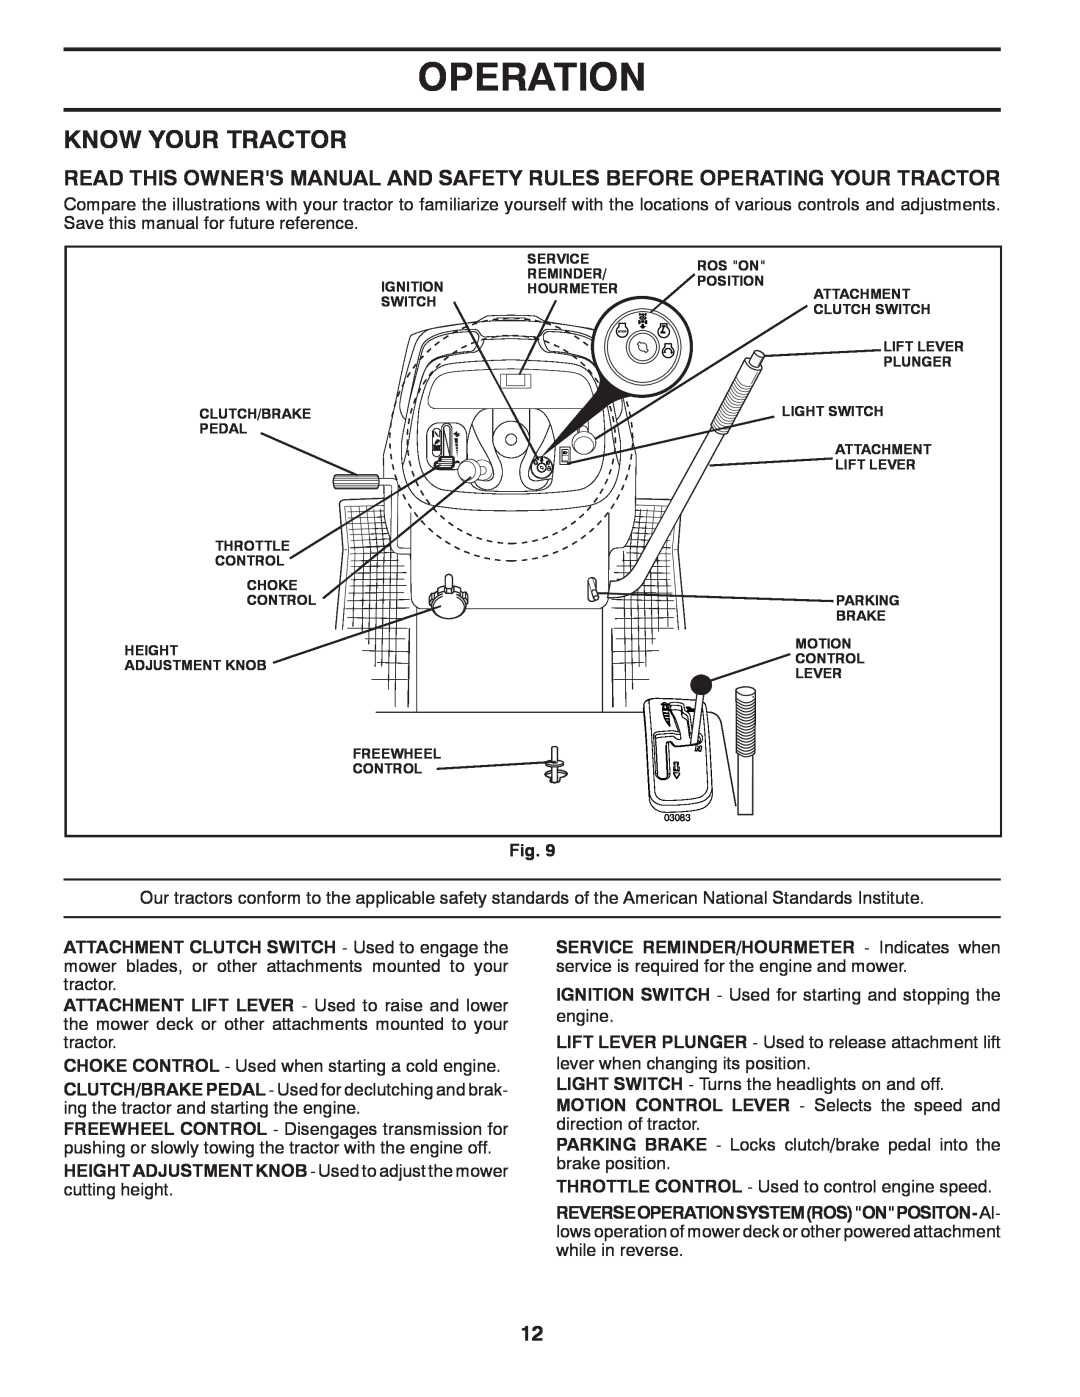 Husqvarna CTH2542T manual Know Your Tractor, Operation, HEIGHT ADJUSTMENT KNOB - Used to adjust the mower cutting height 